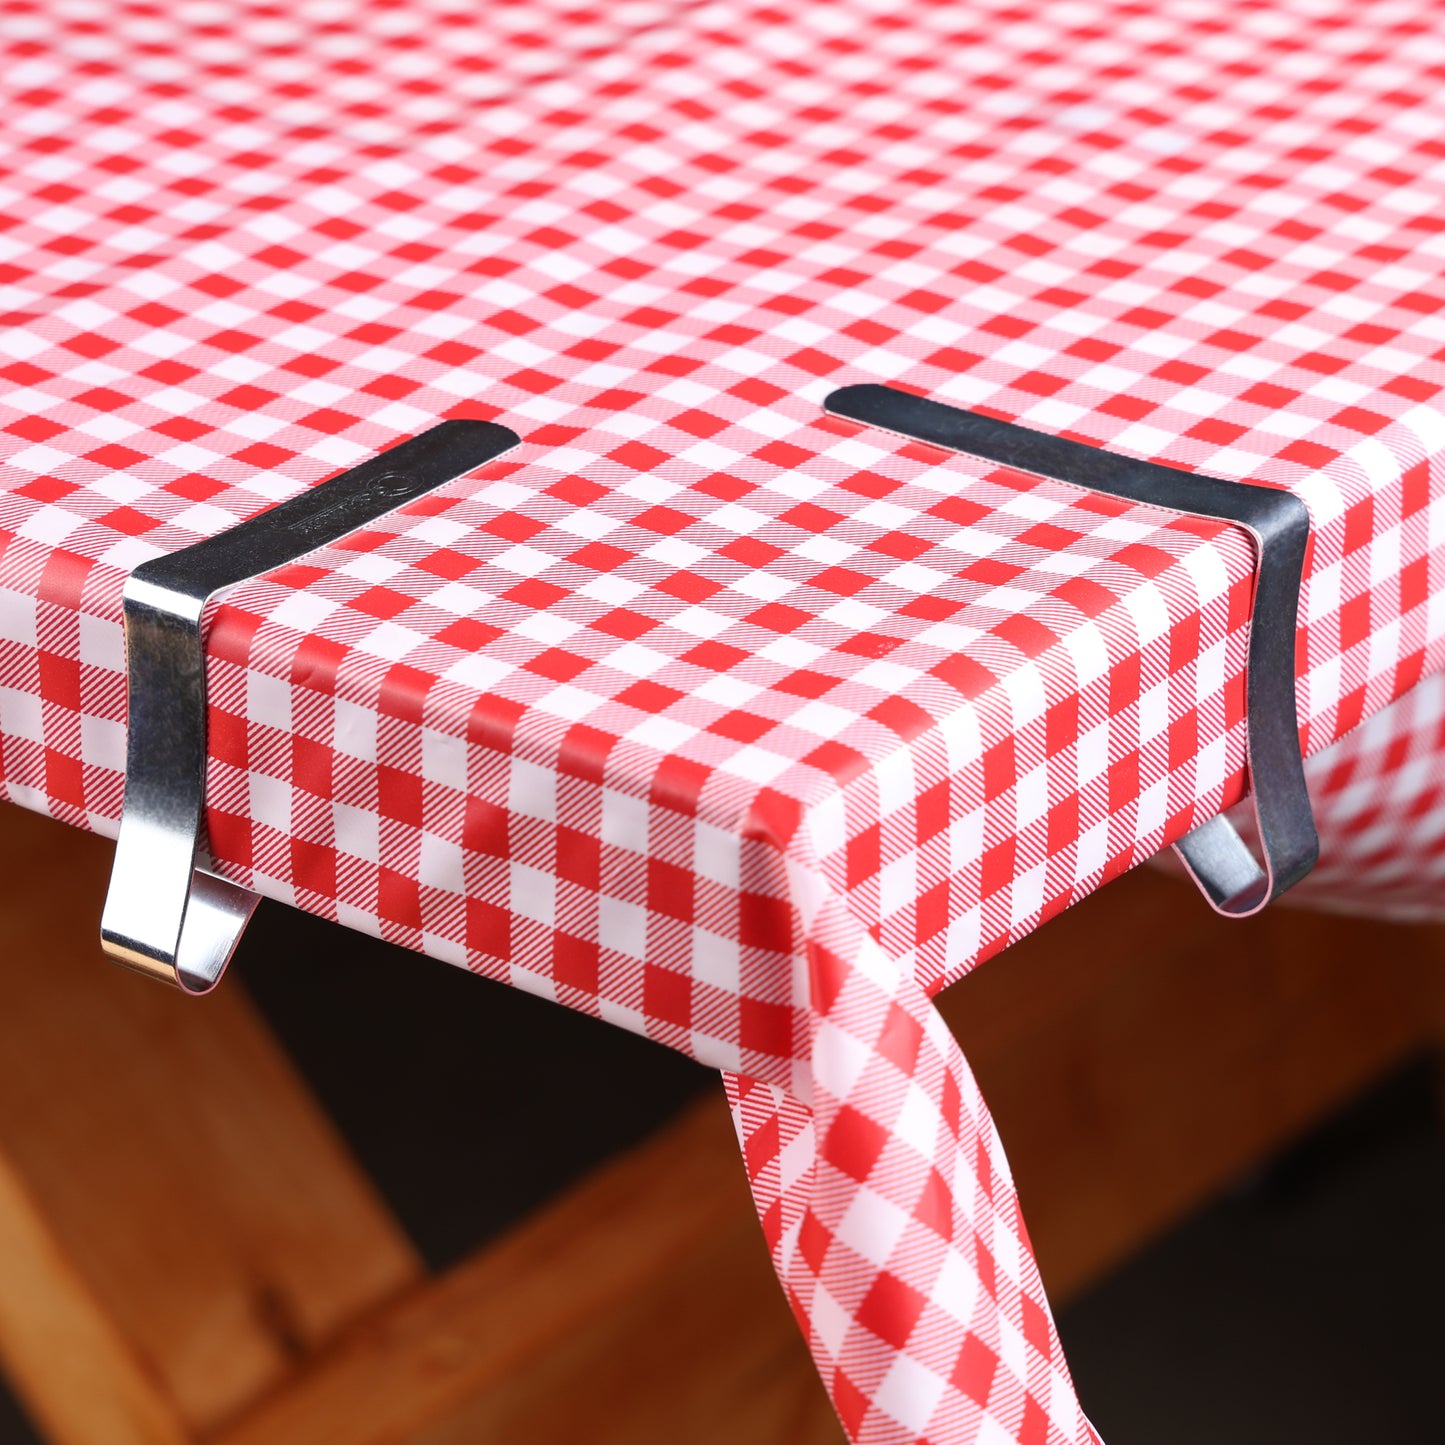 Tablecloth Clamps